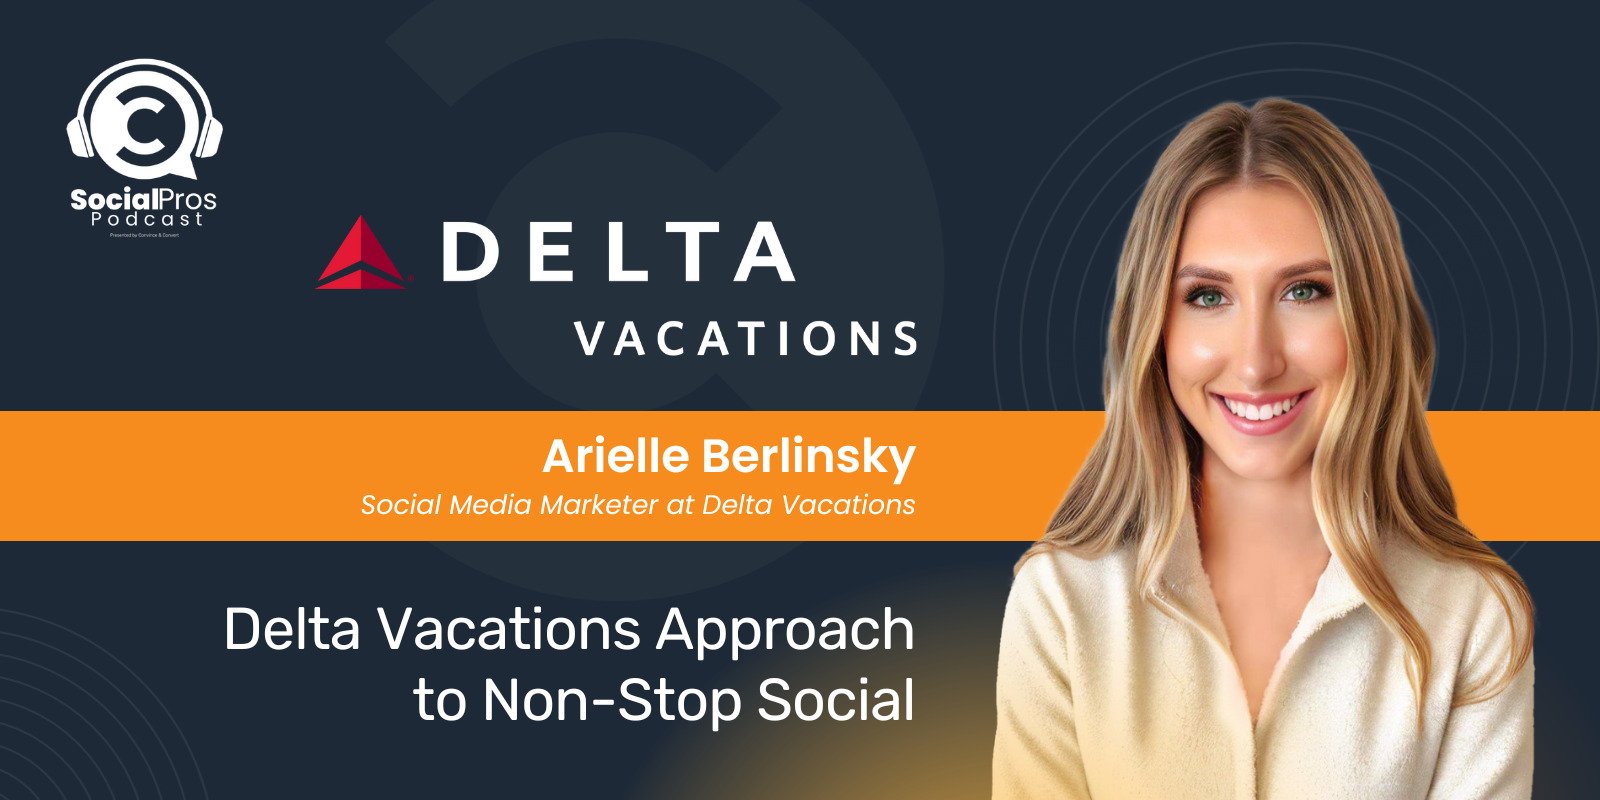 Delta Vacations Approach to Non-Stop Social